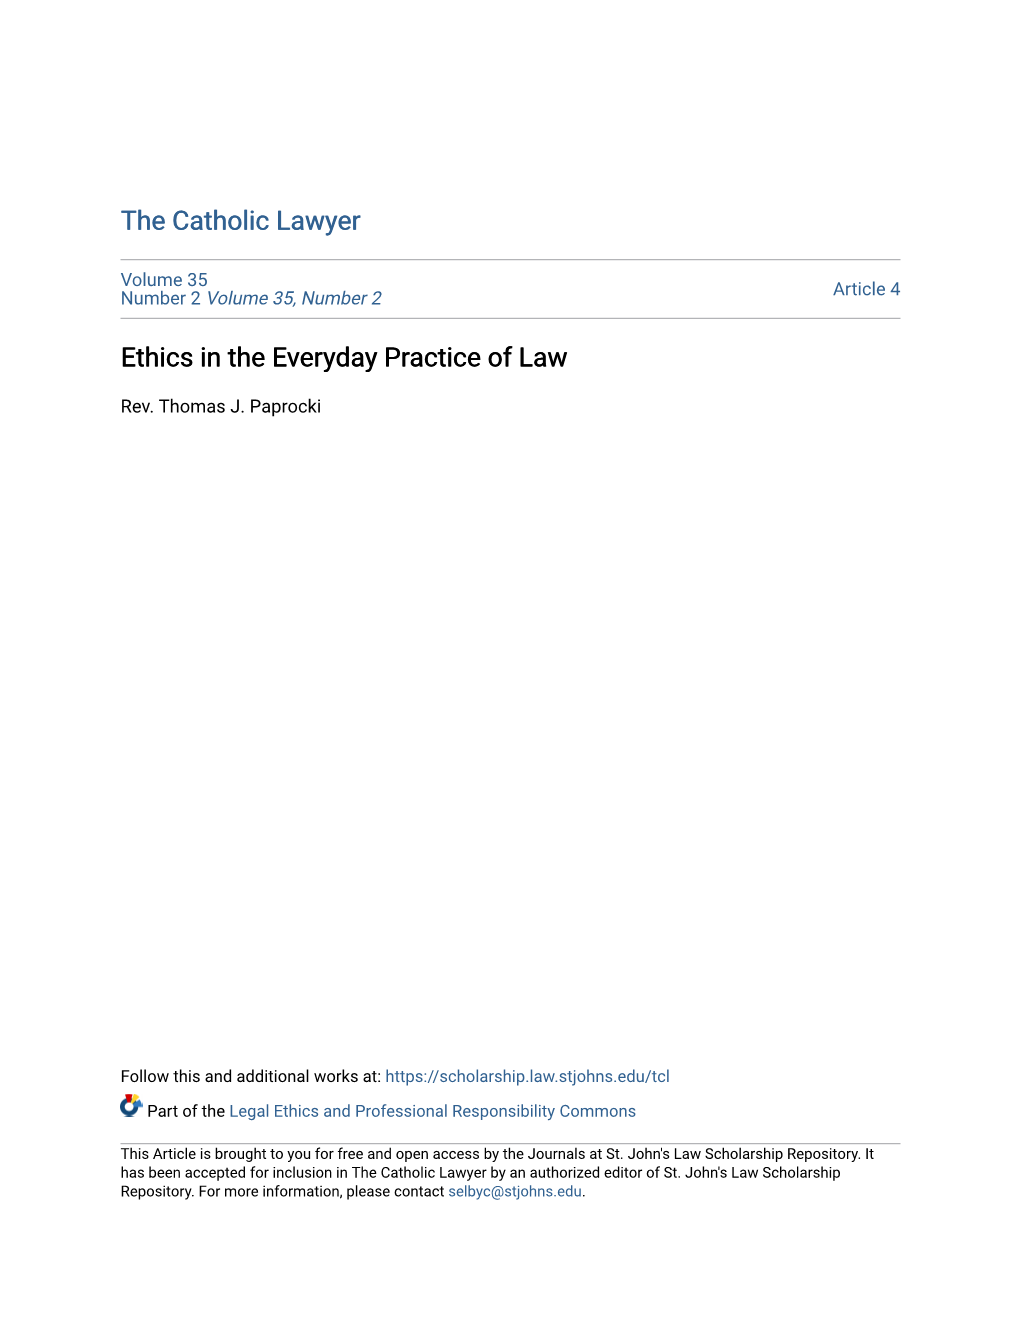 Ethics in the Everyday Practice of Law